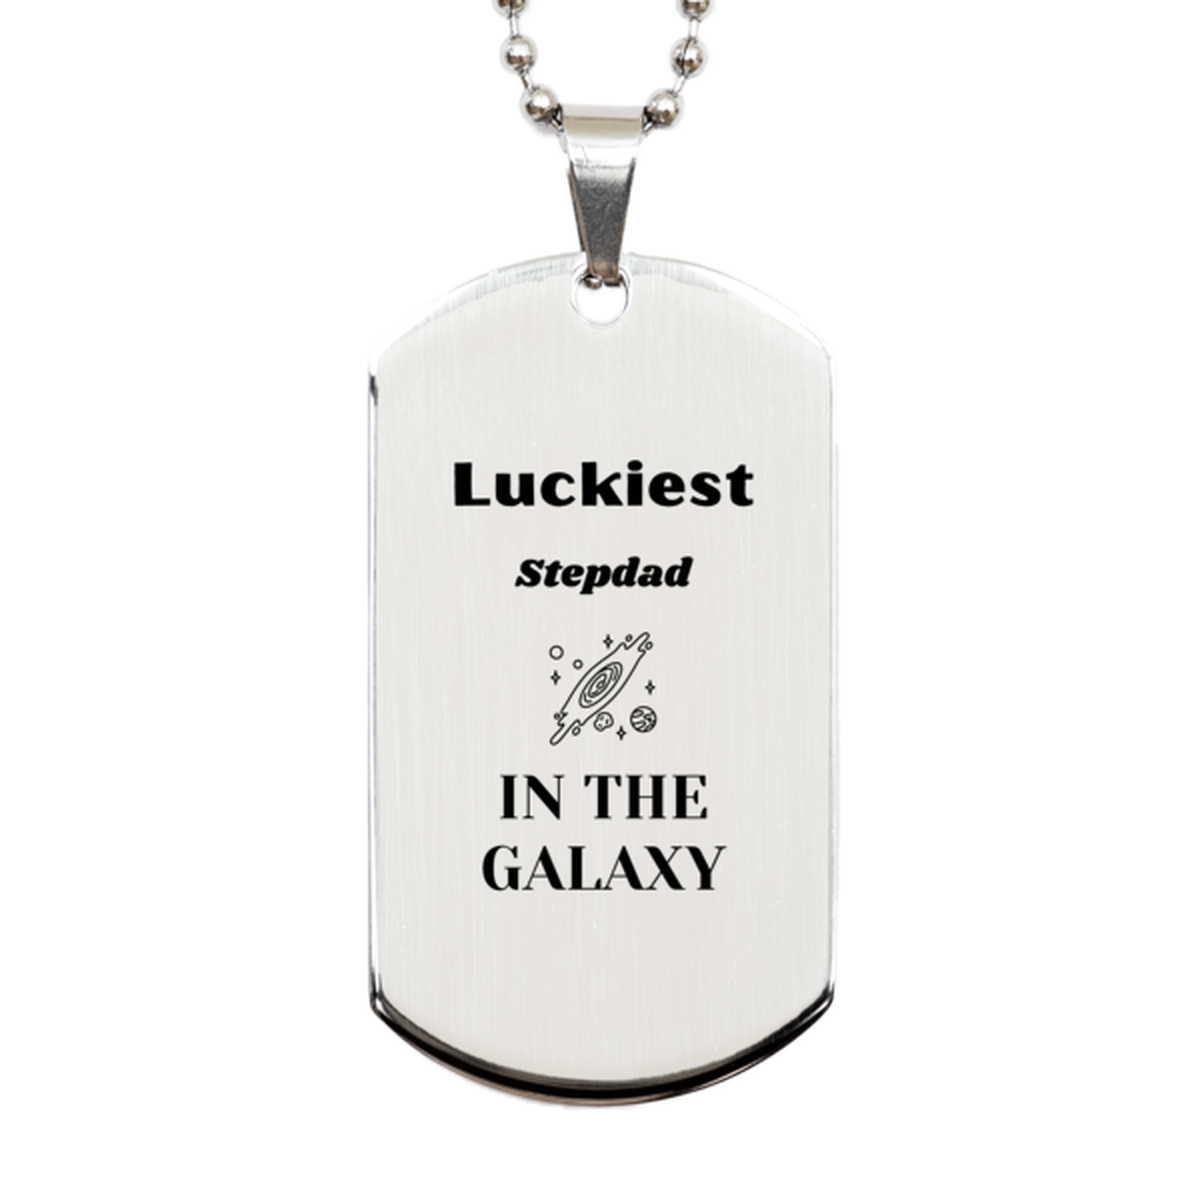 Luckiest Stepdad in the Galaxy, To My Stepdad Engraved Gifts, Christmas Stepdad Silver Dog Tag Gifts, X-mas Birthday Unique Gifts For Stepdad Men Women